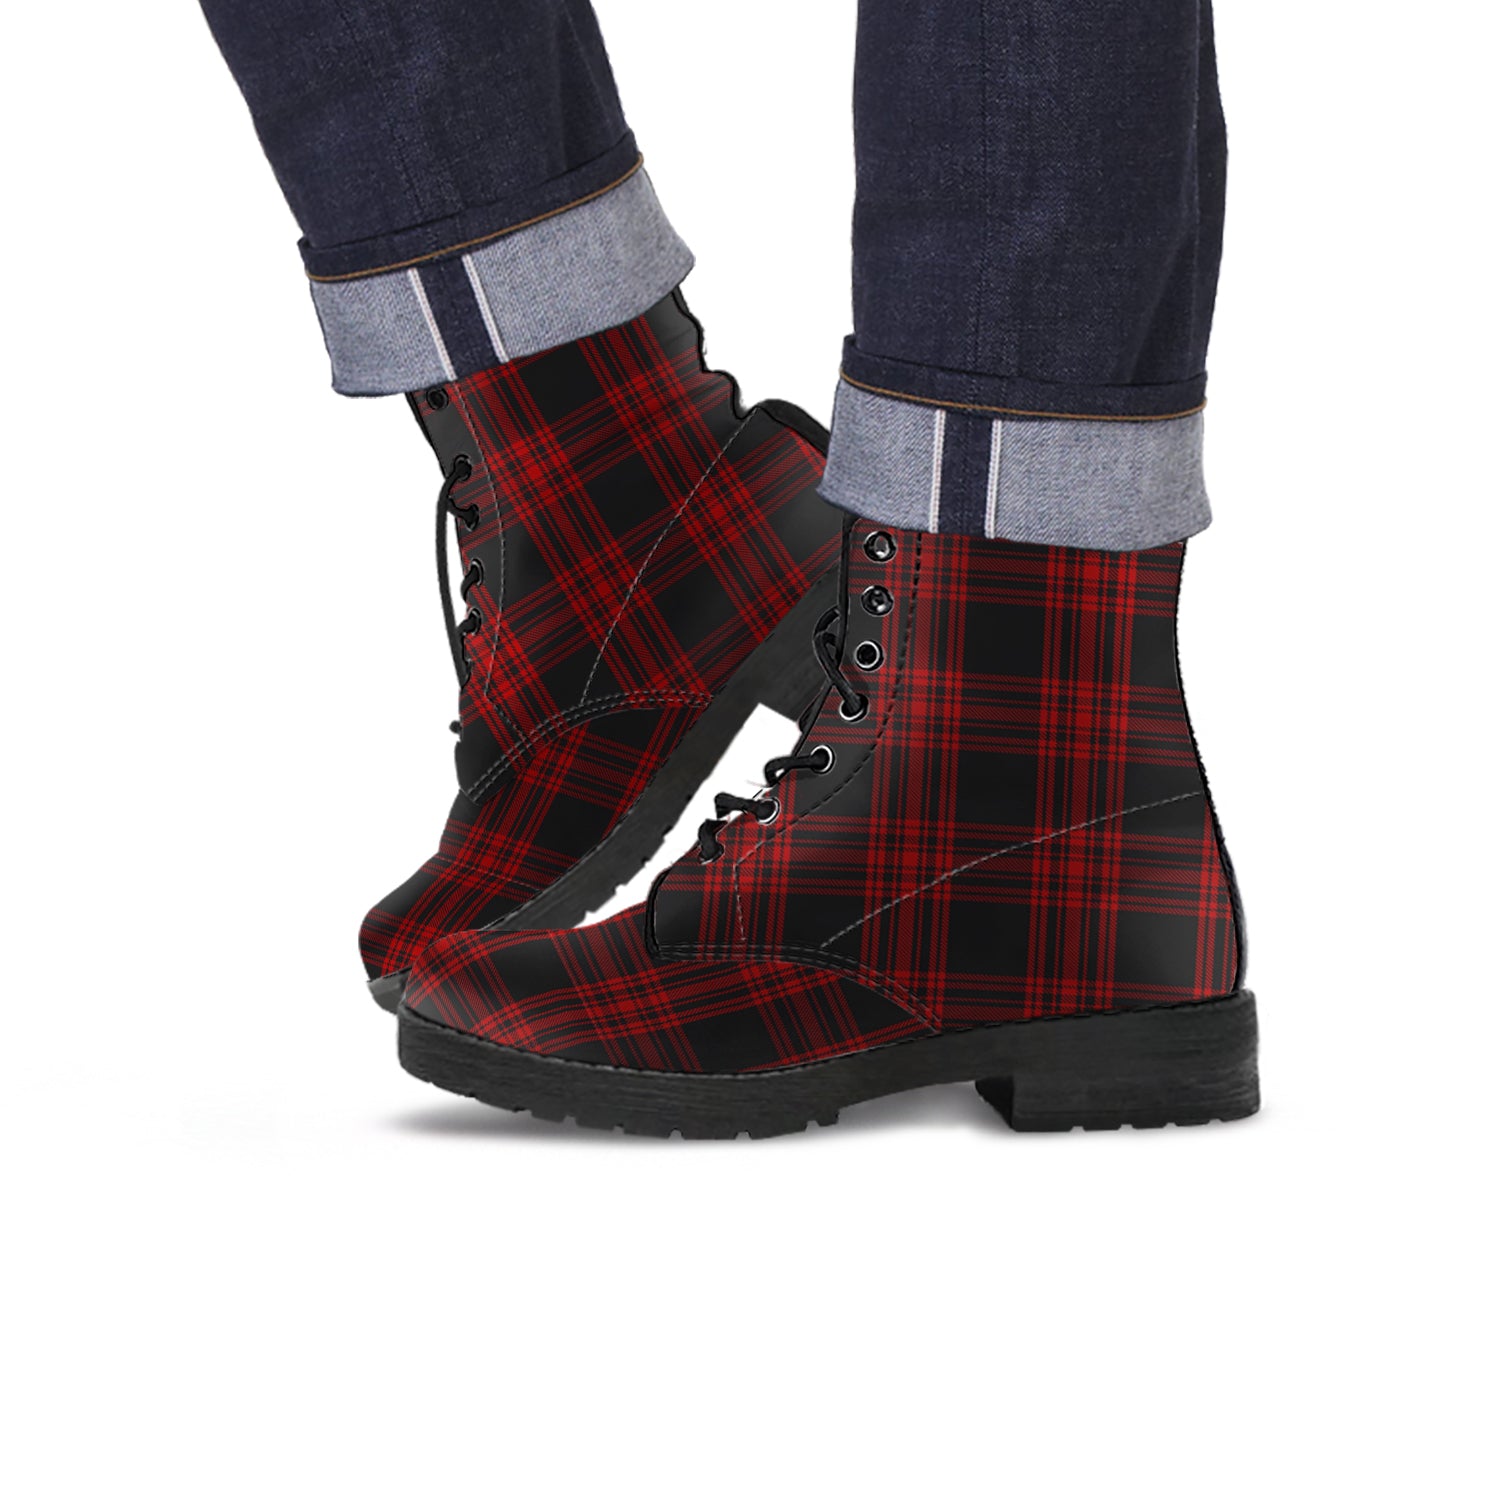 menzies-hunting-tartan-leather-boots